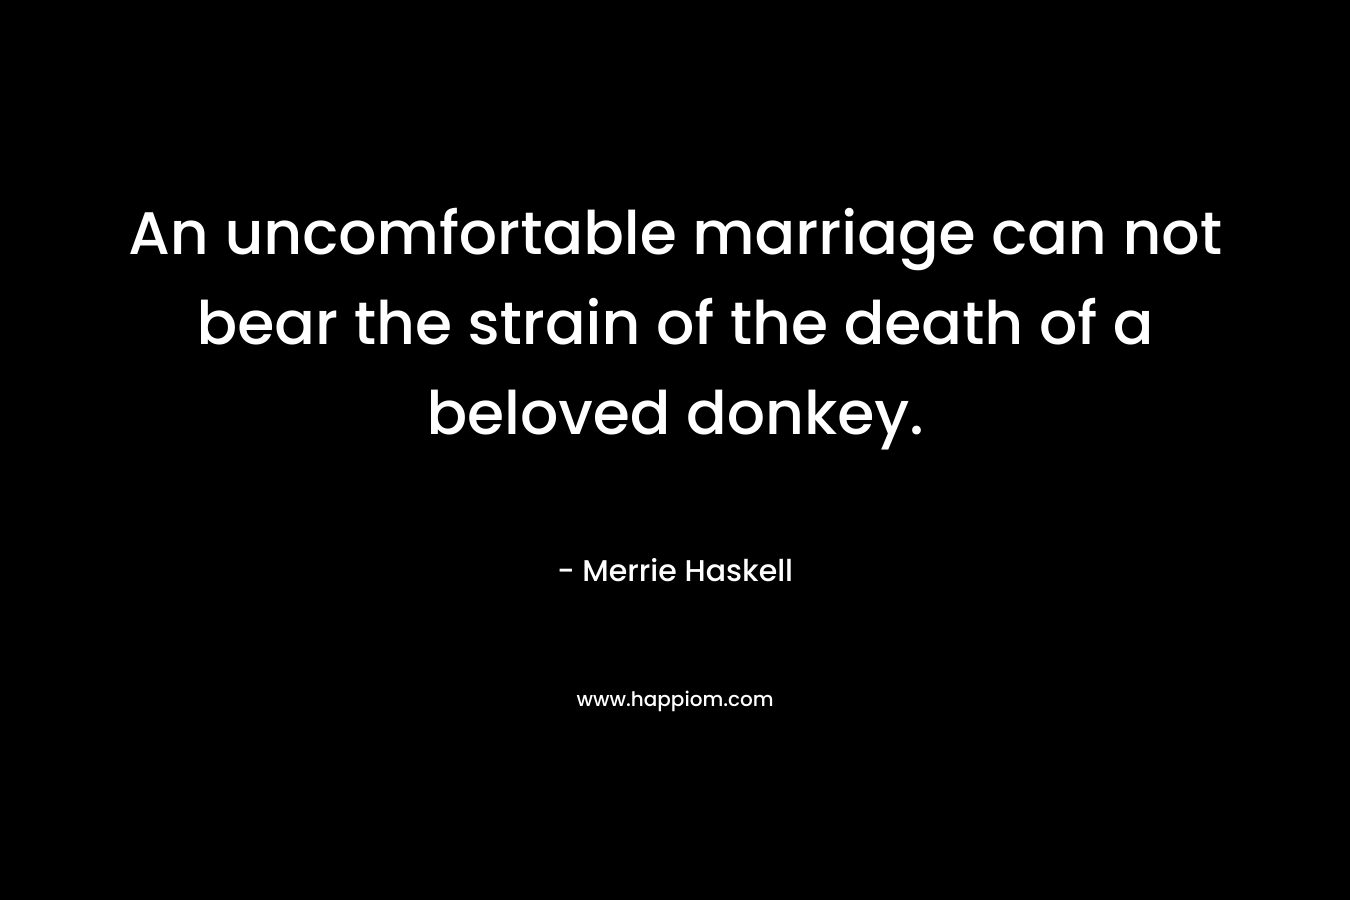 An uncomfortable marriage can not bear the strain of the death of a beloved donkey.